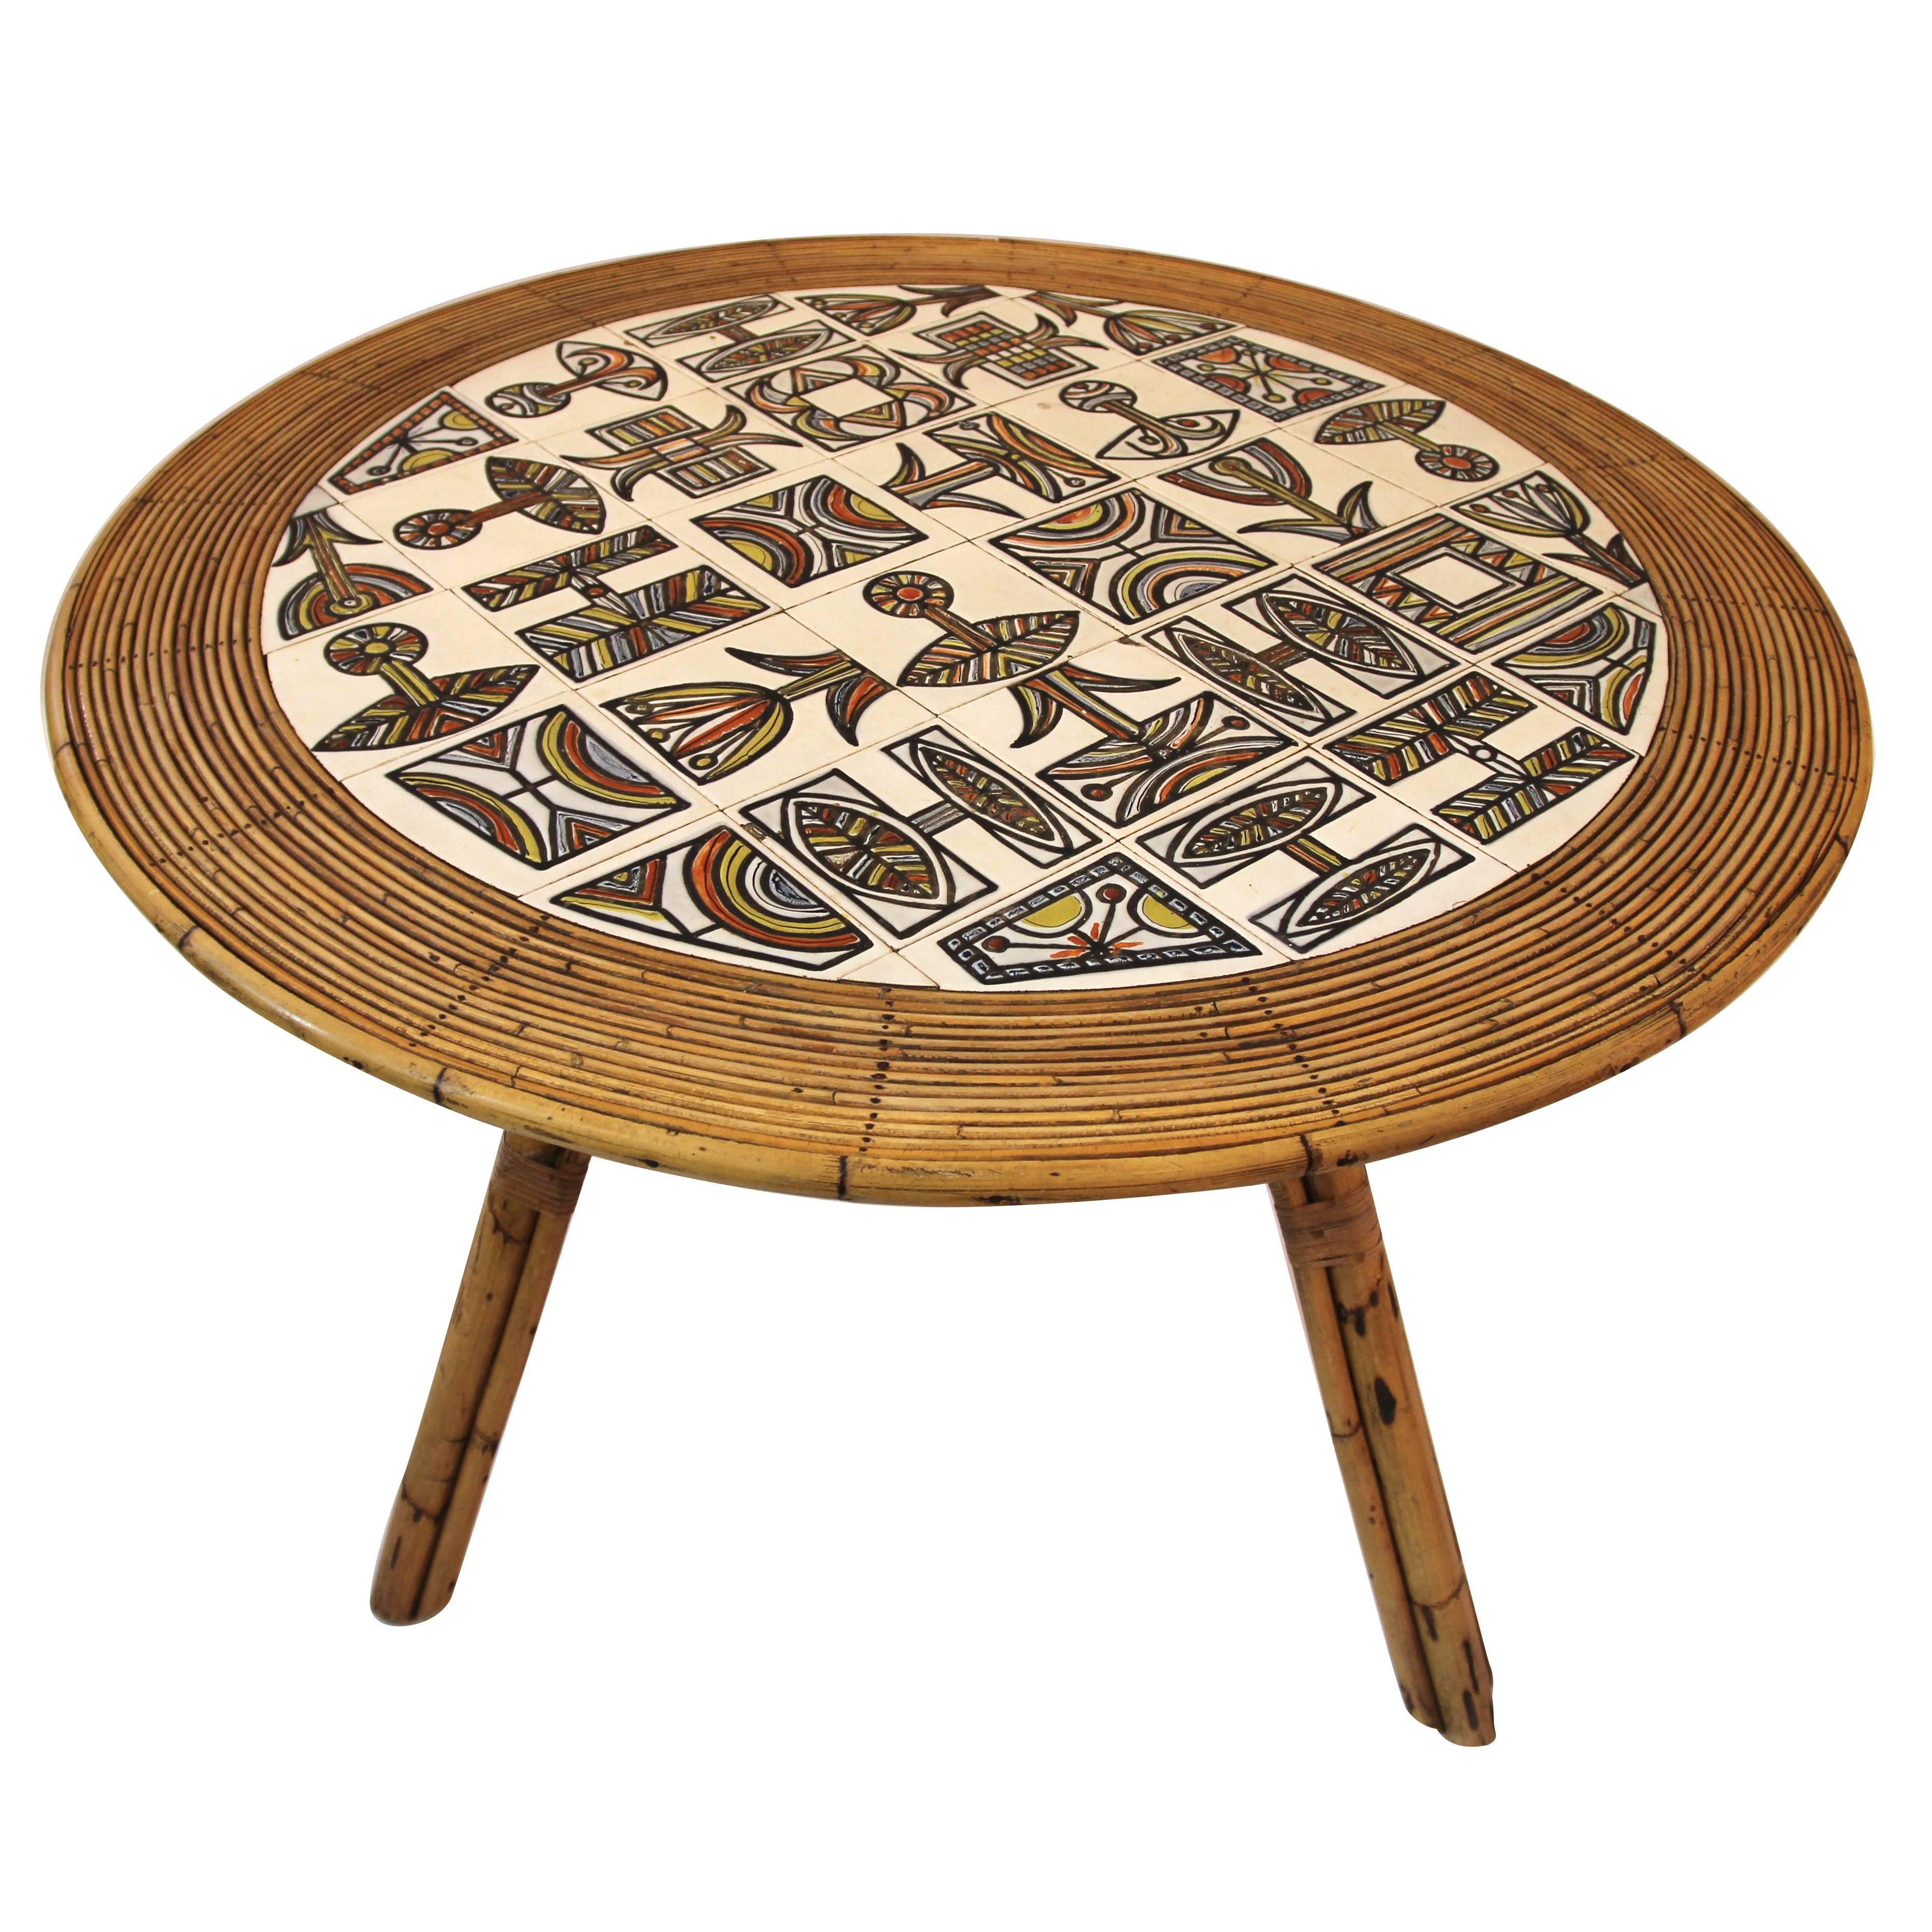 Audoux-Minet Table with Ceramic Top by Roger Capron, circa 1960 France